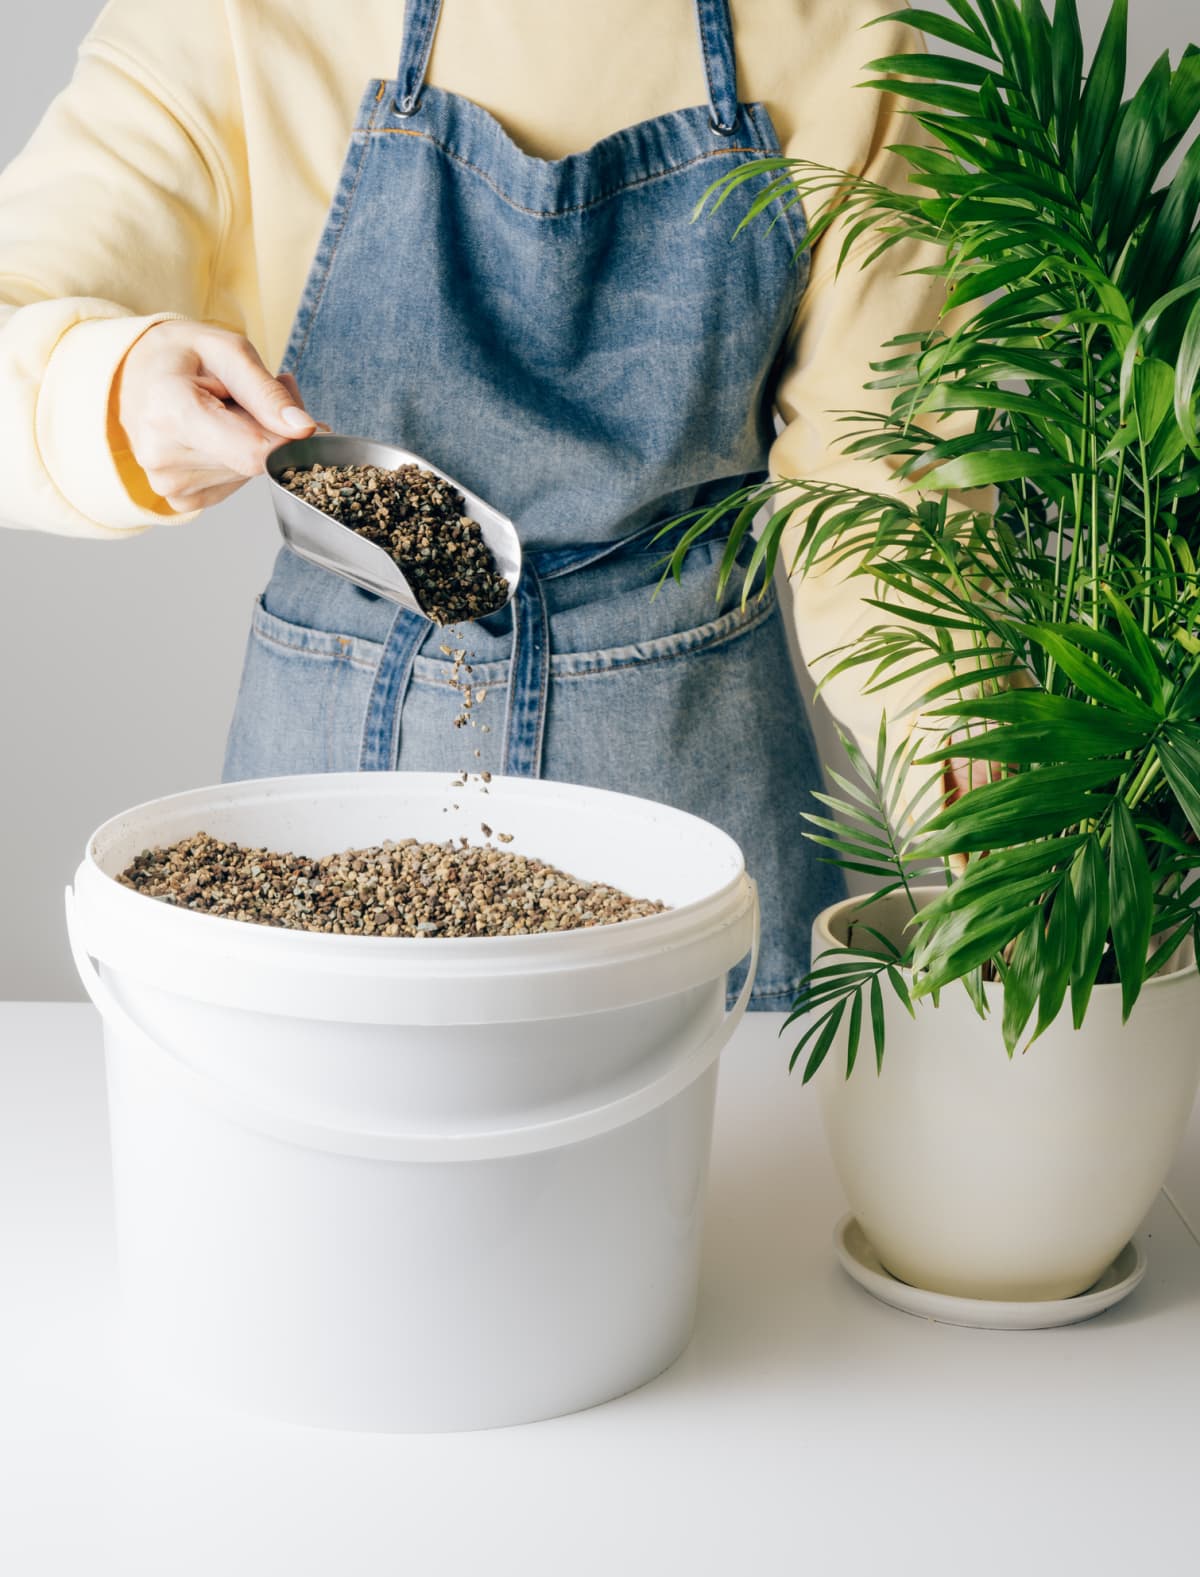 A woman applying fertilizer to an indoor houseplant